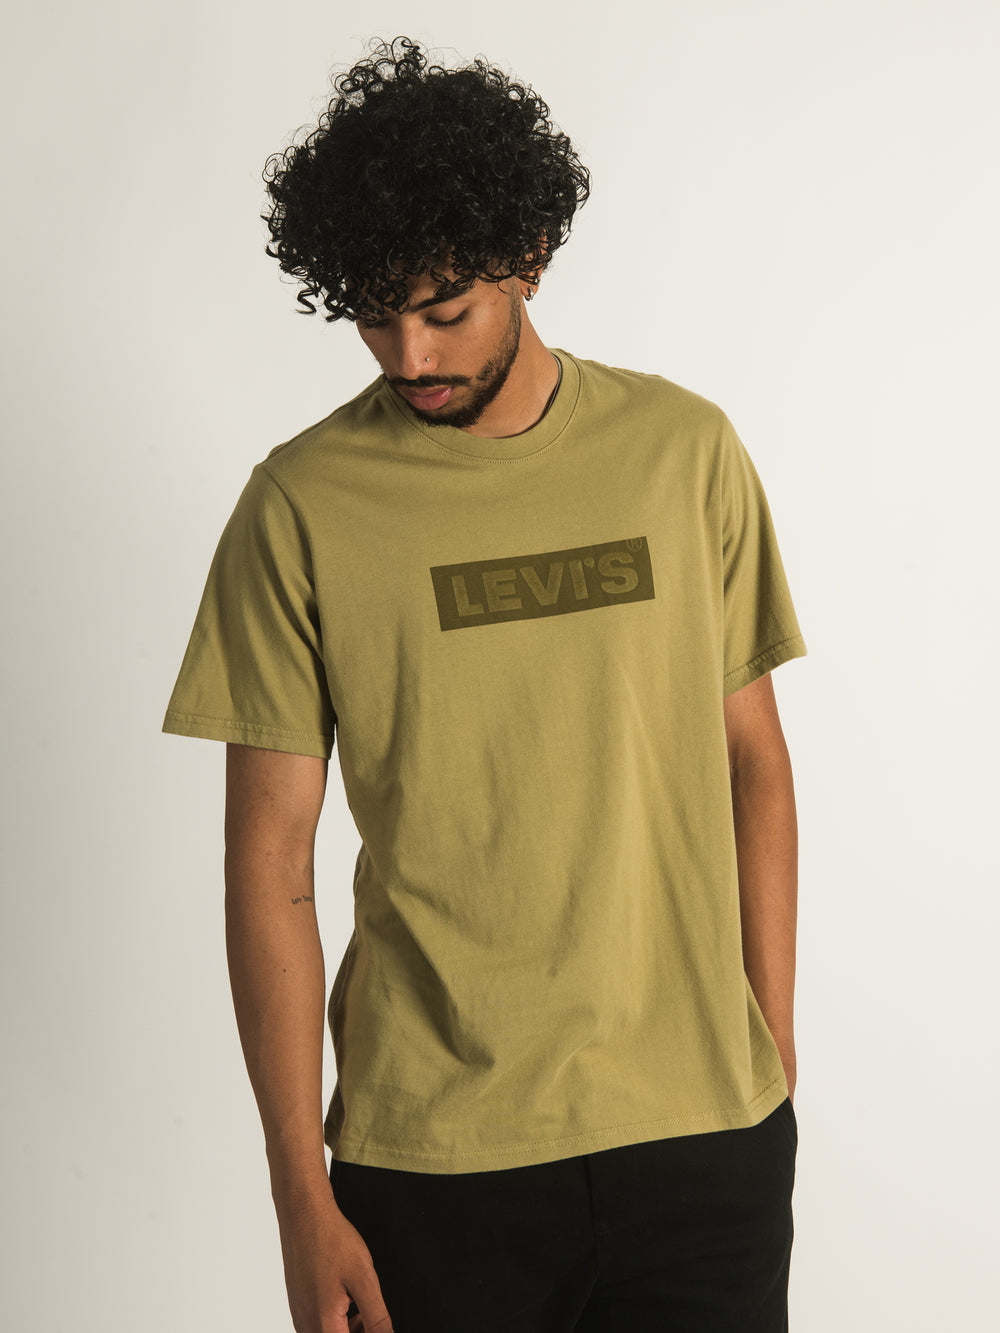 LEVIS RELAXED FIT T-SHIRT - CLEARANCE